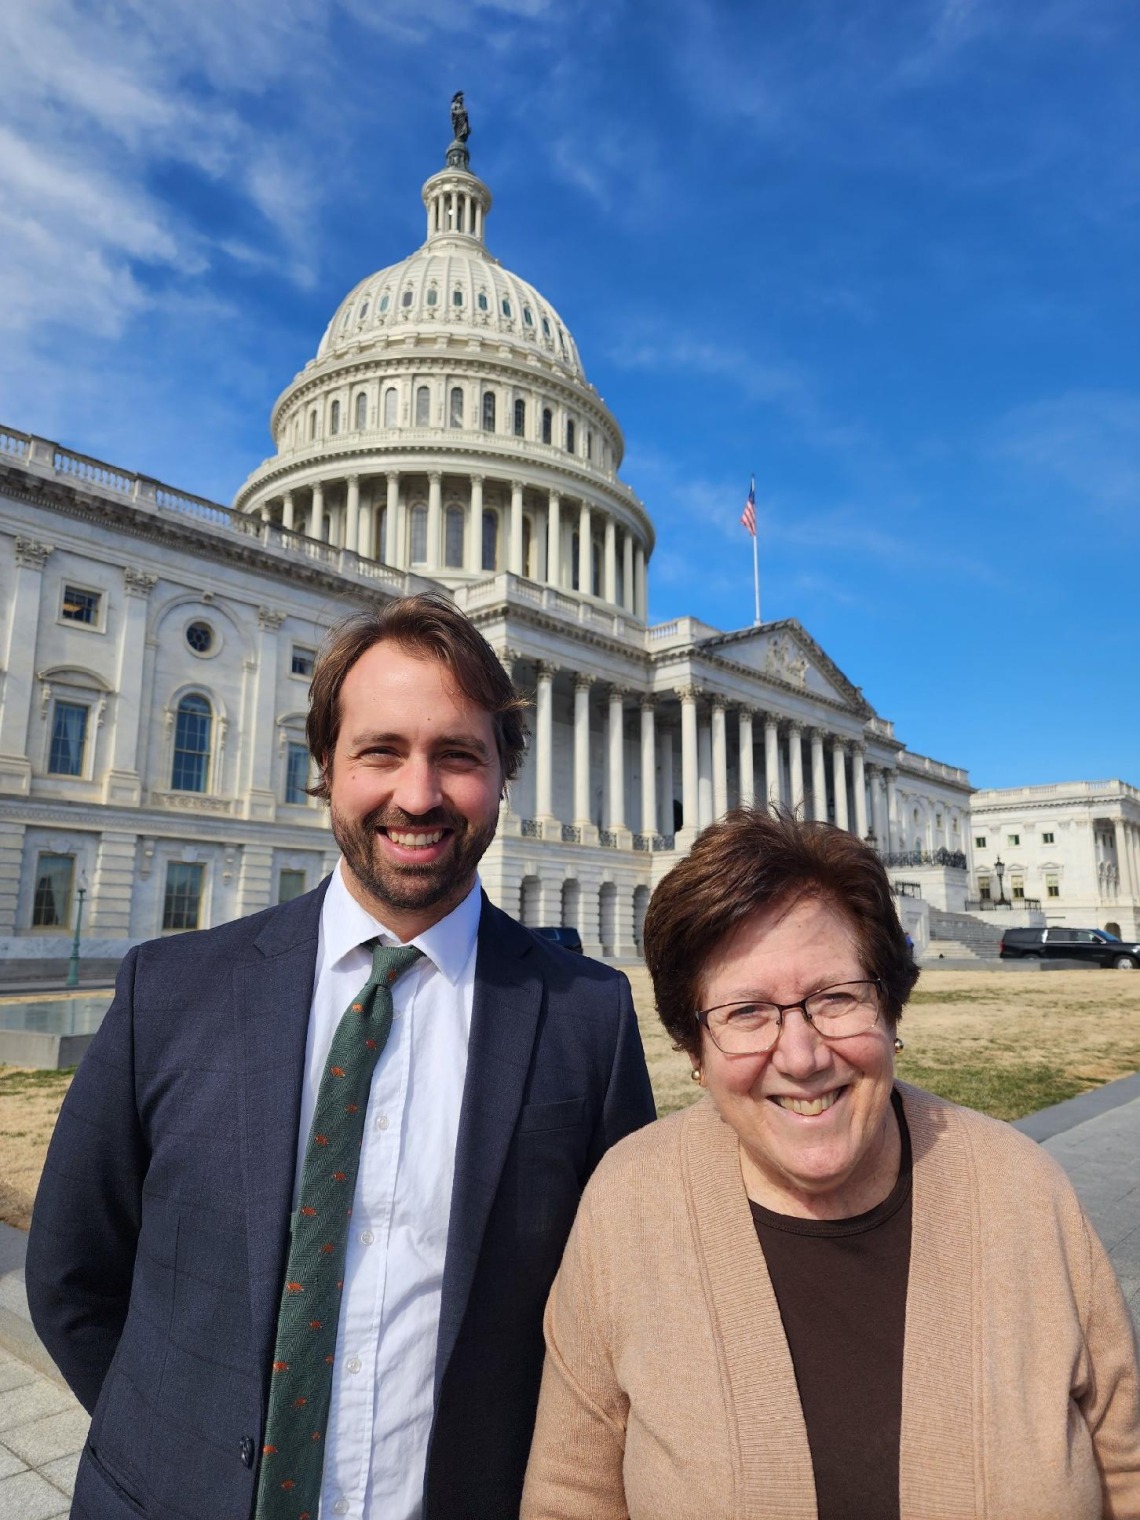 Dr. Megdal and Michael Seronde in front of the U.S. Capitol Building